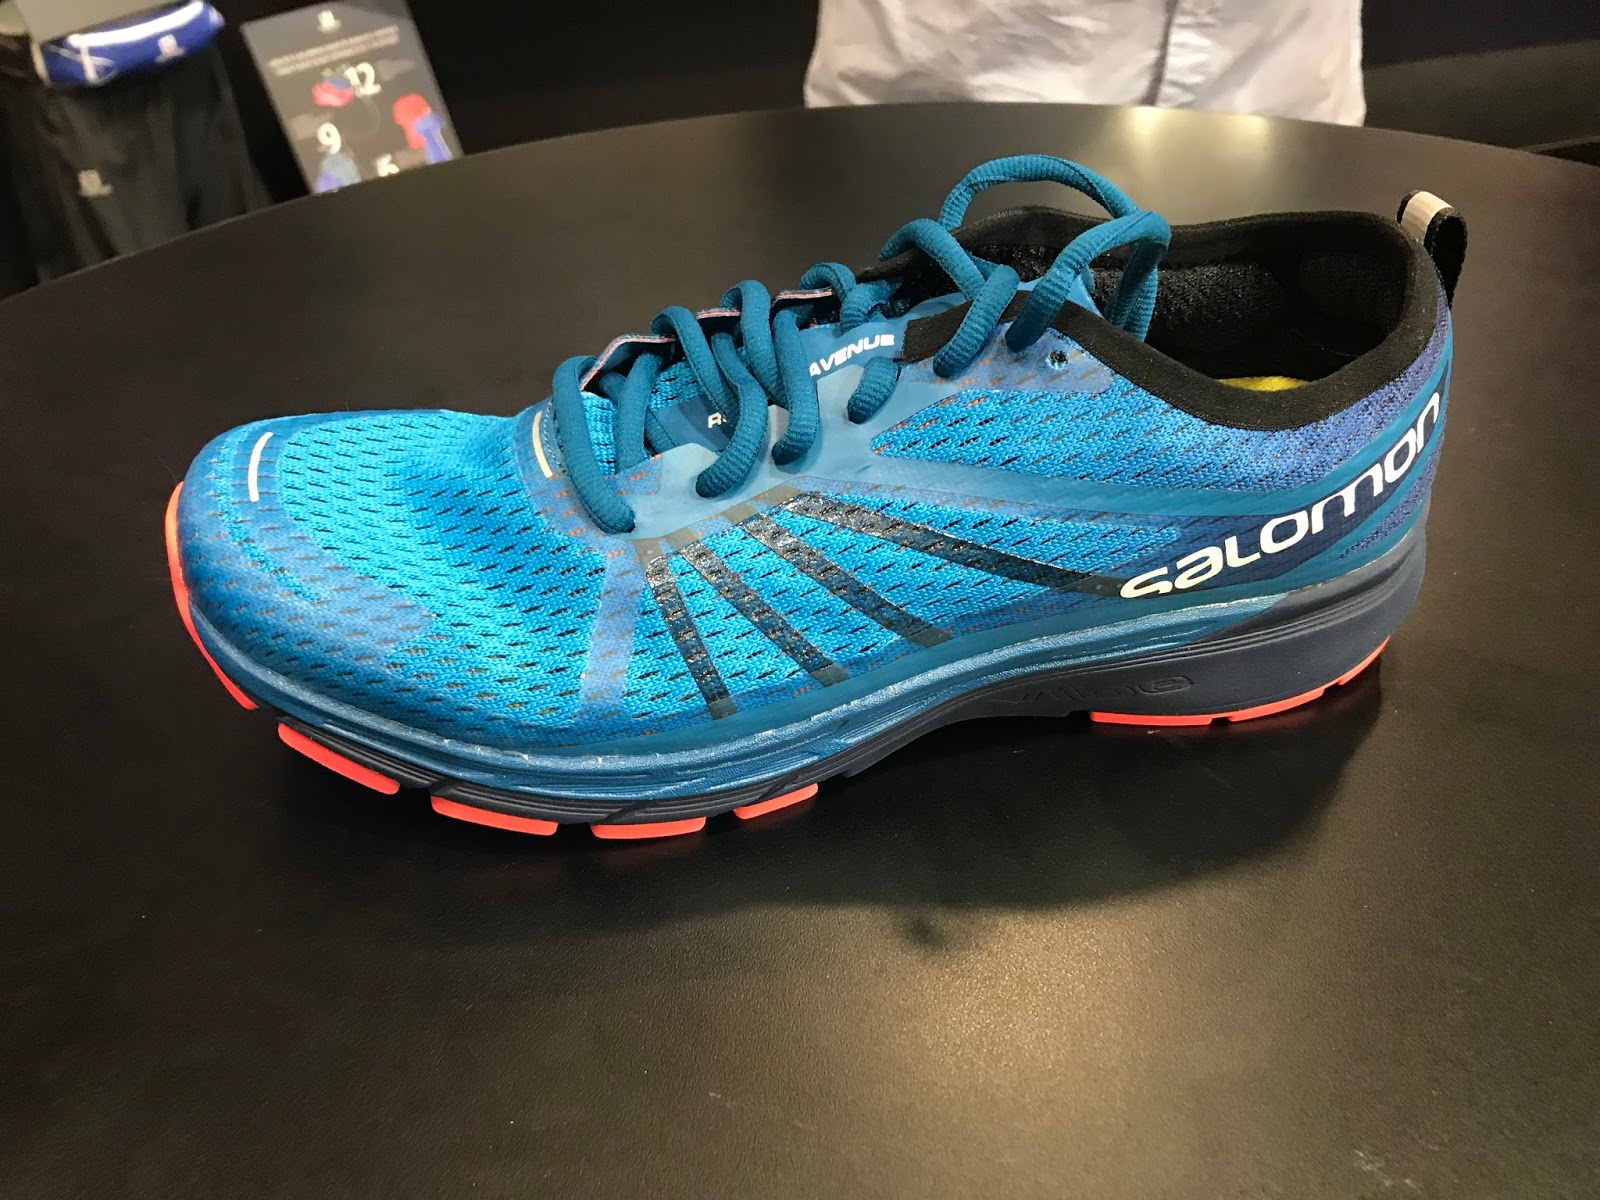 flamme Fortære Overskyet Road Trail Run: Outdoor Retailer 2018 Salomon Running Introductions- New  Running Avenue Road Collection: Sonic RA Pro, Sonic RA. Sonic RA Max